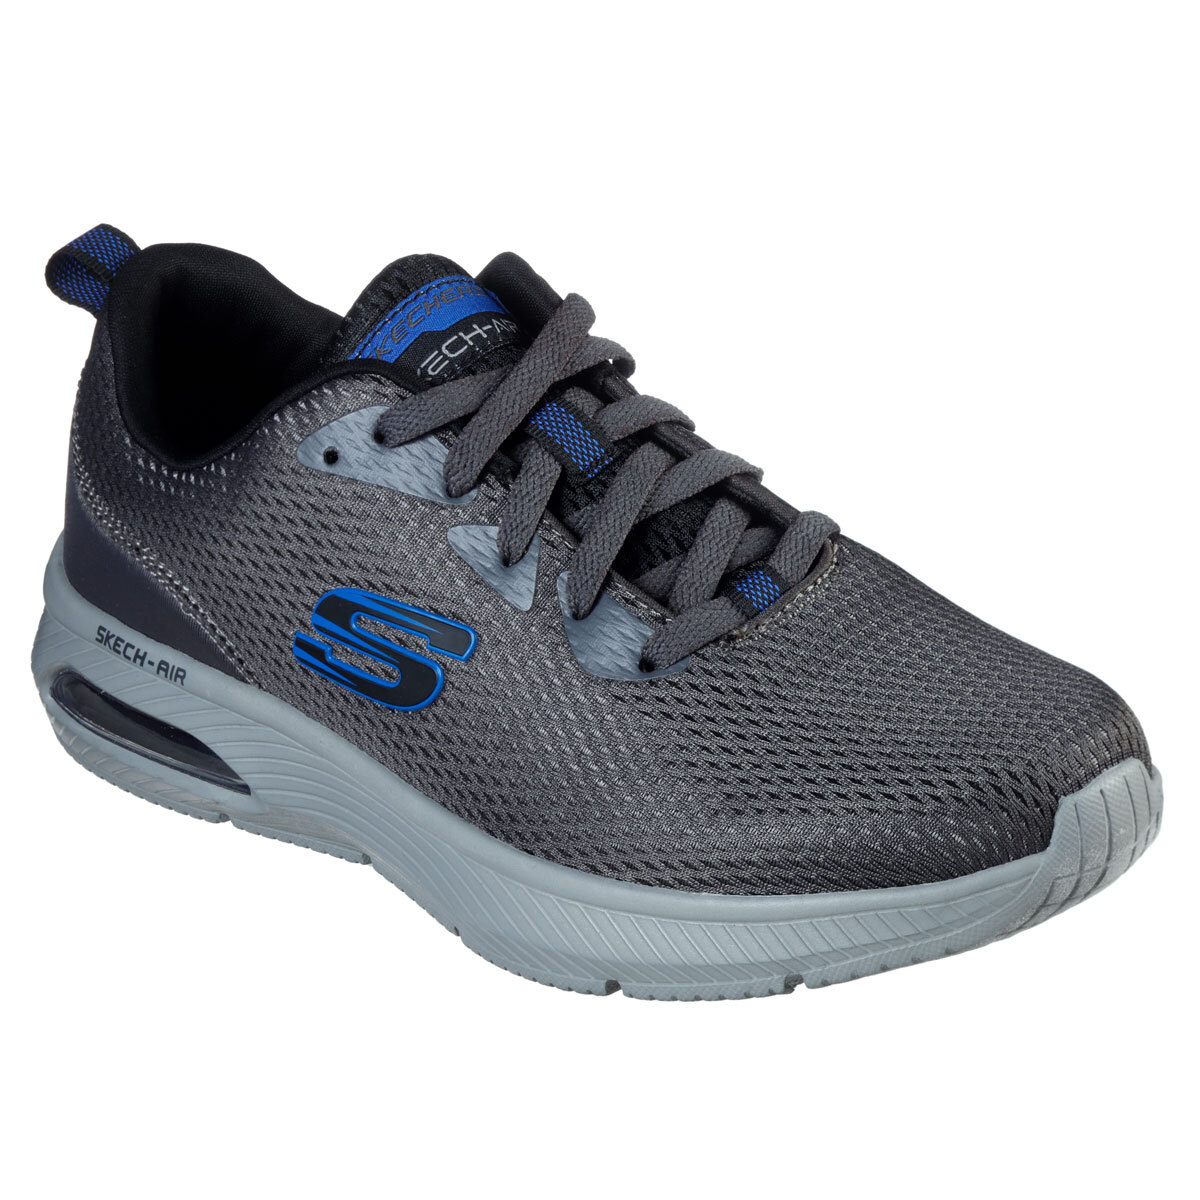 Skechers Dyna Air Shoes in Grey Costco UK